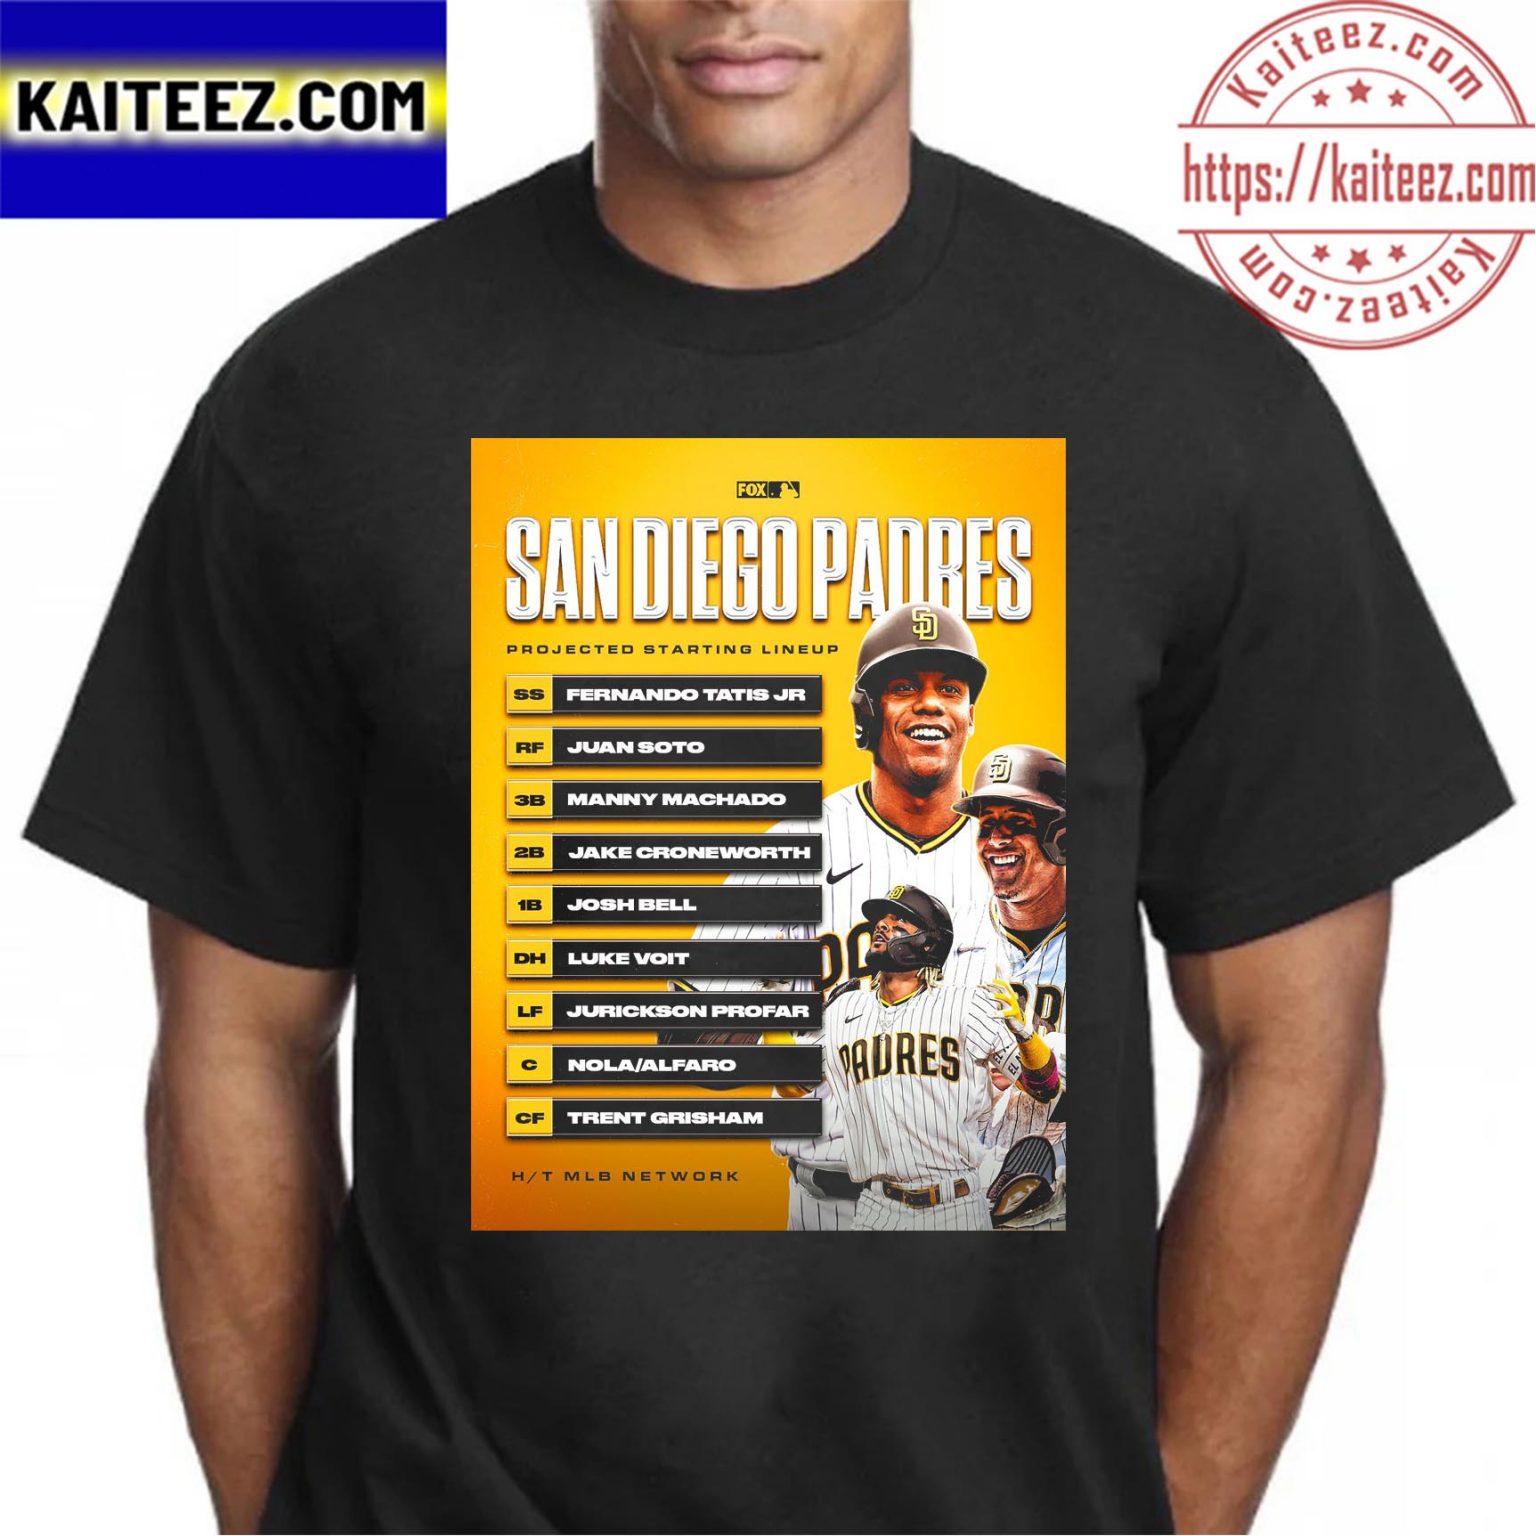 San Diego Padres Projected Starting Lineup Tshirt Kaiteez